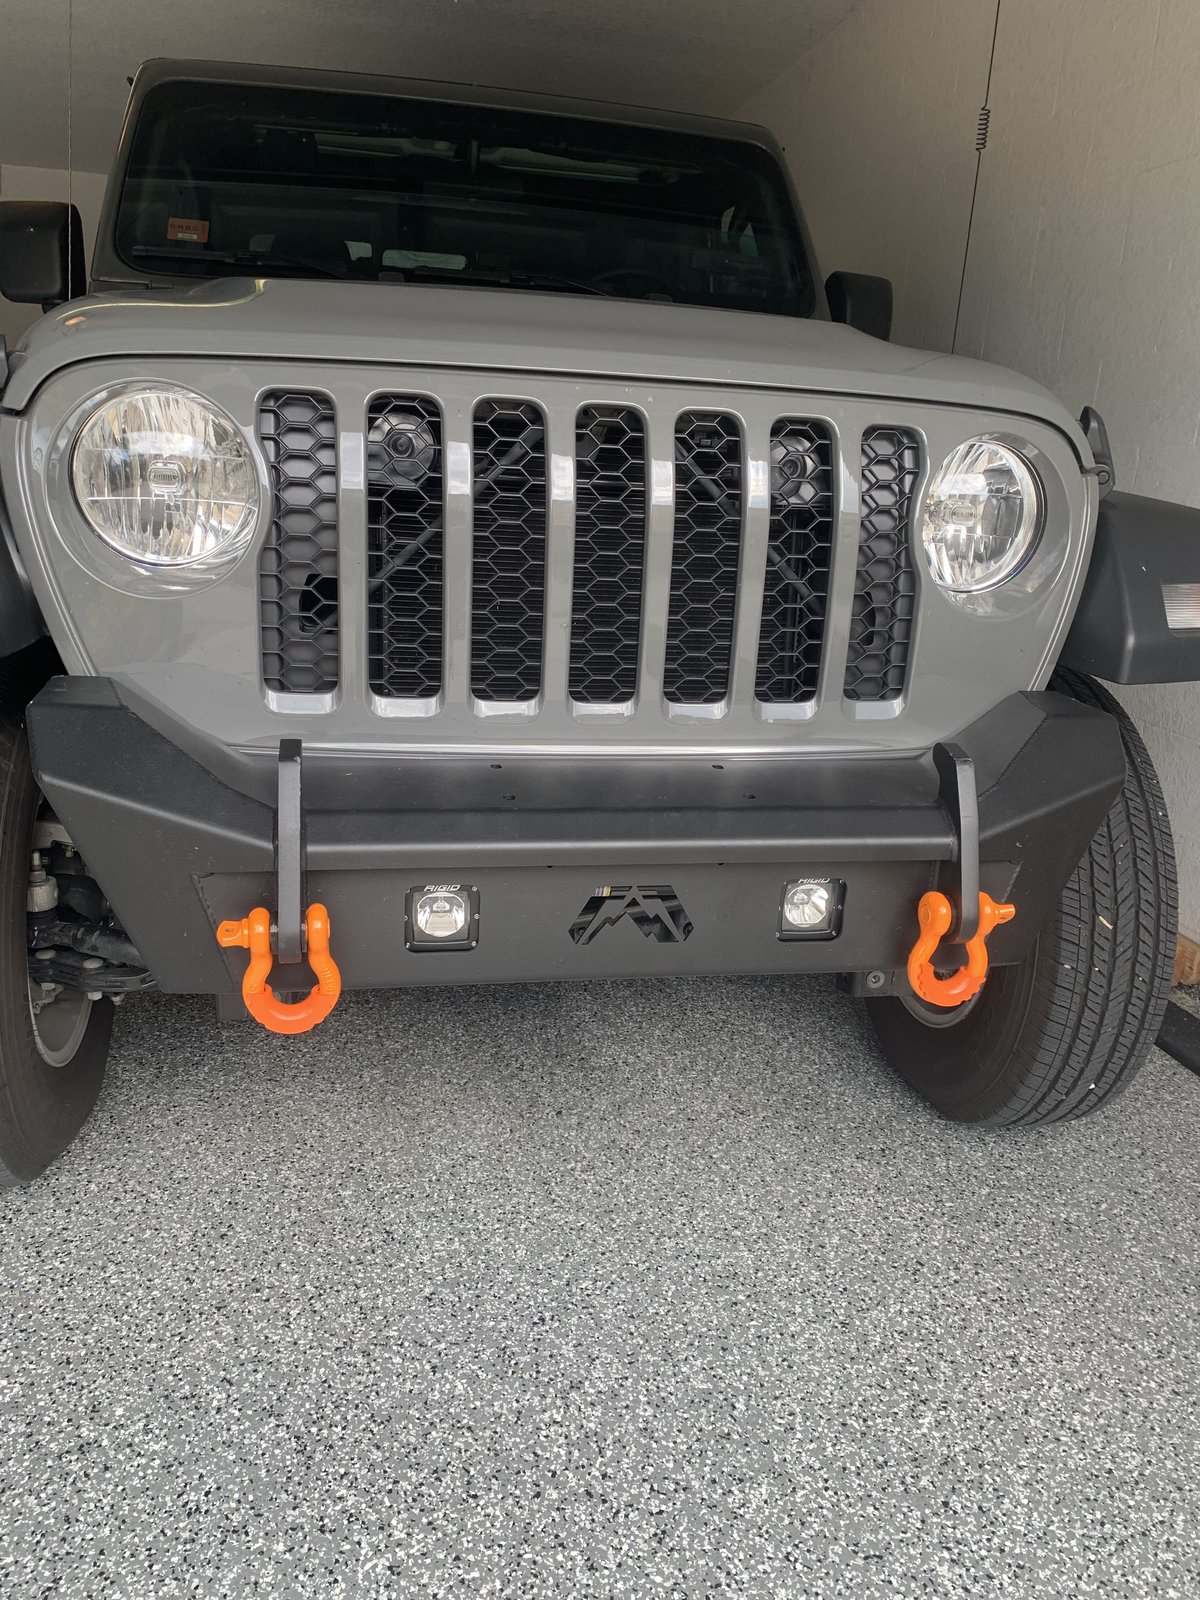 Gladiator front bumper with hooks to flat tow behing a motorhome